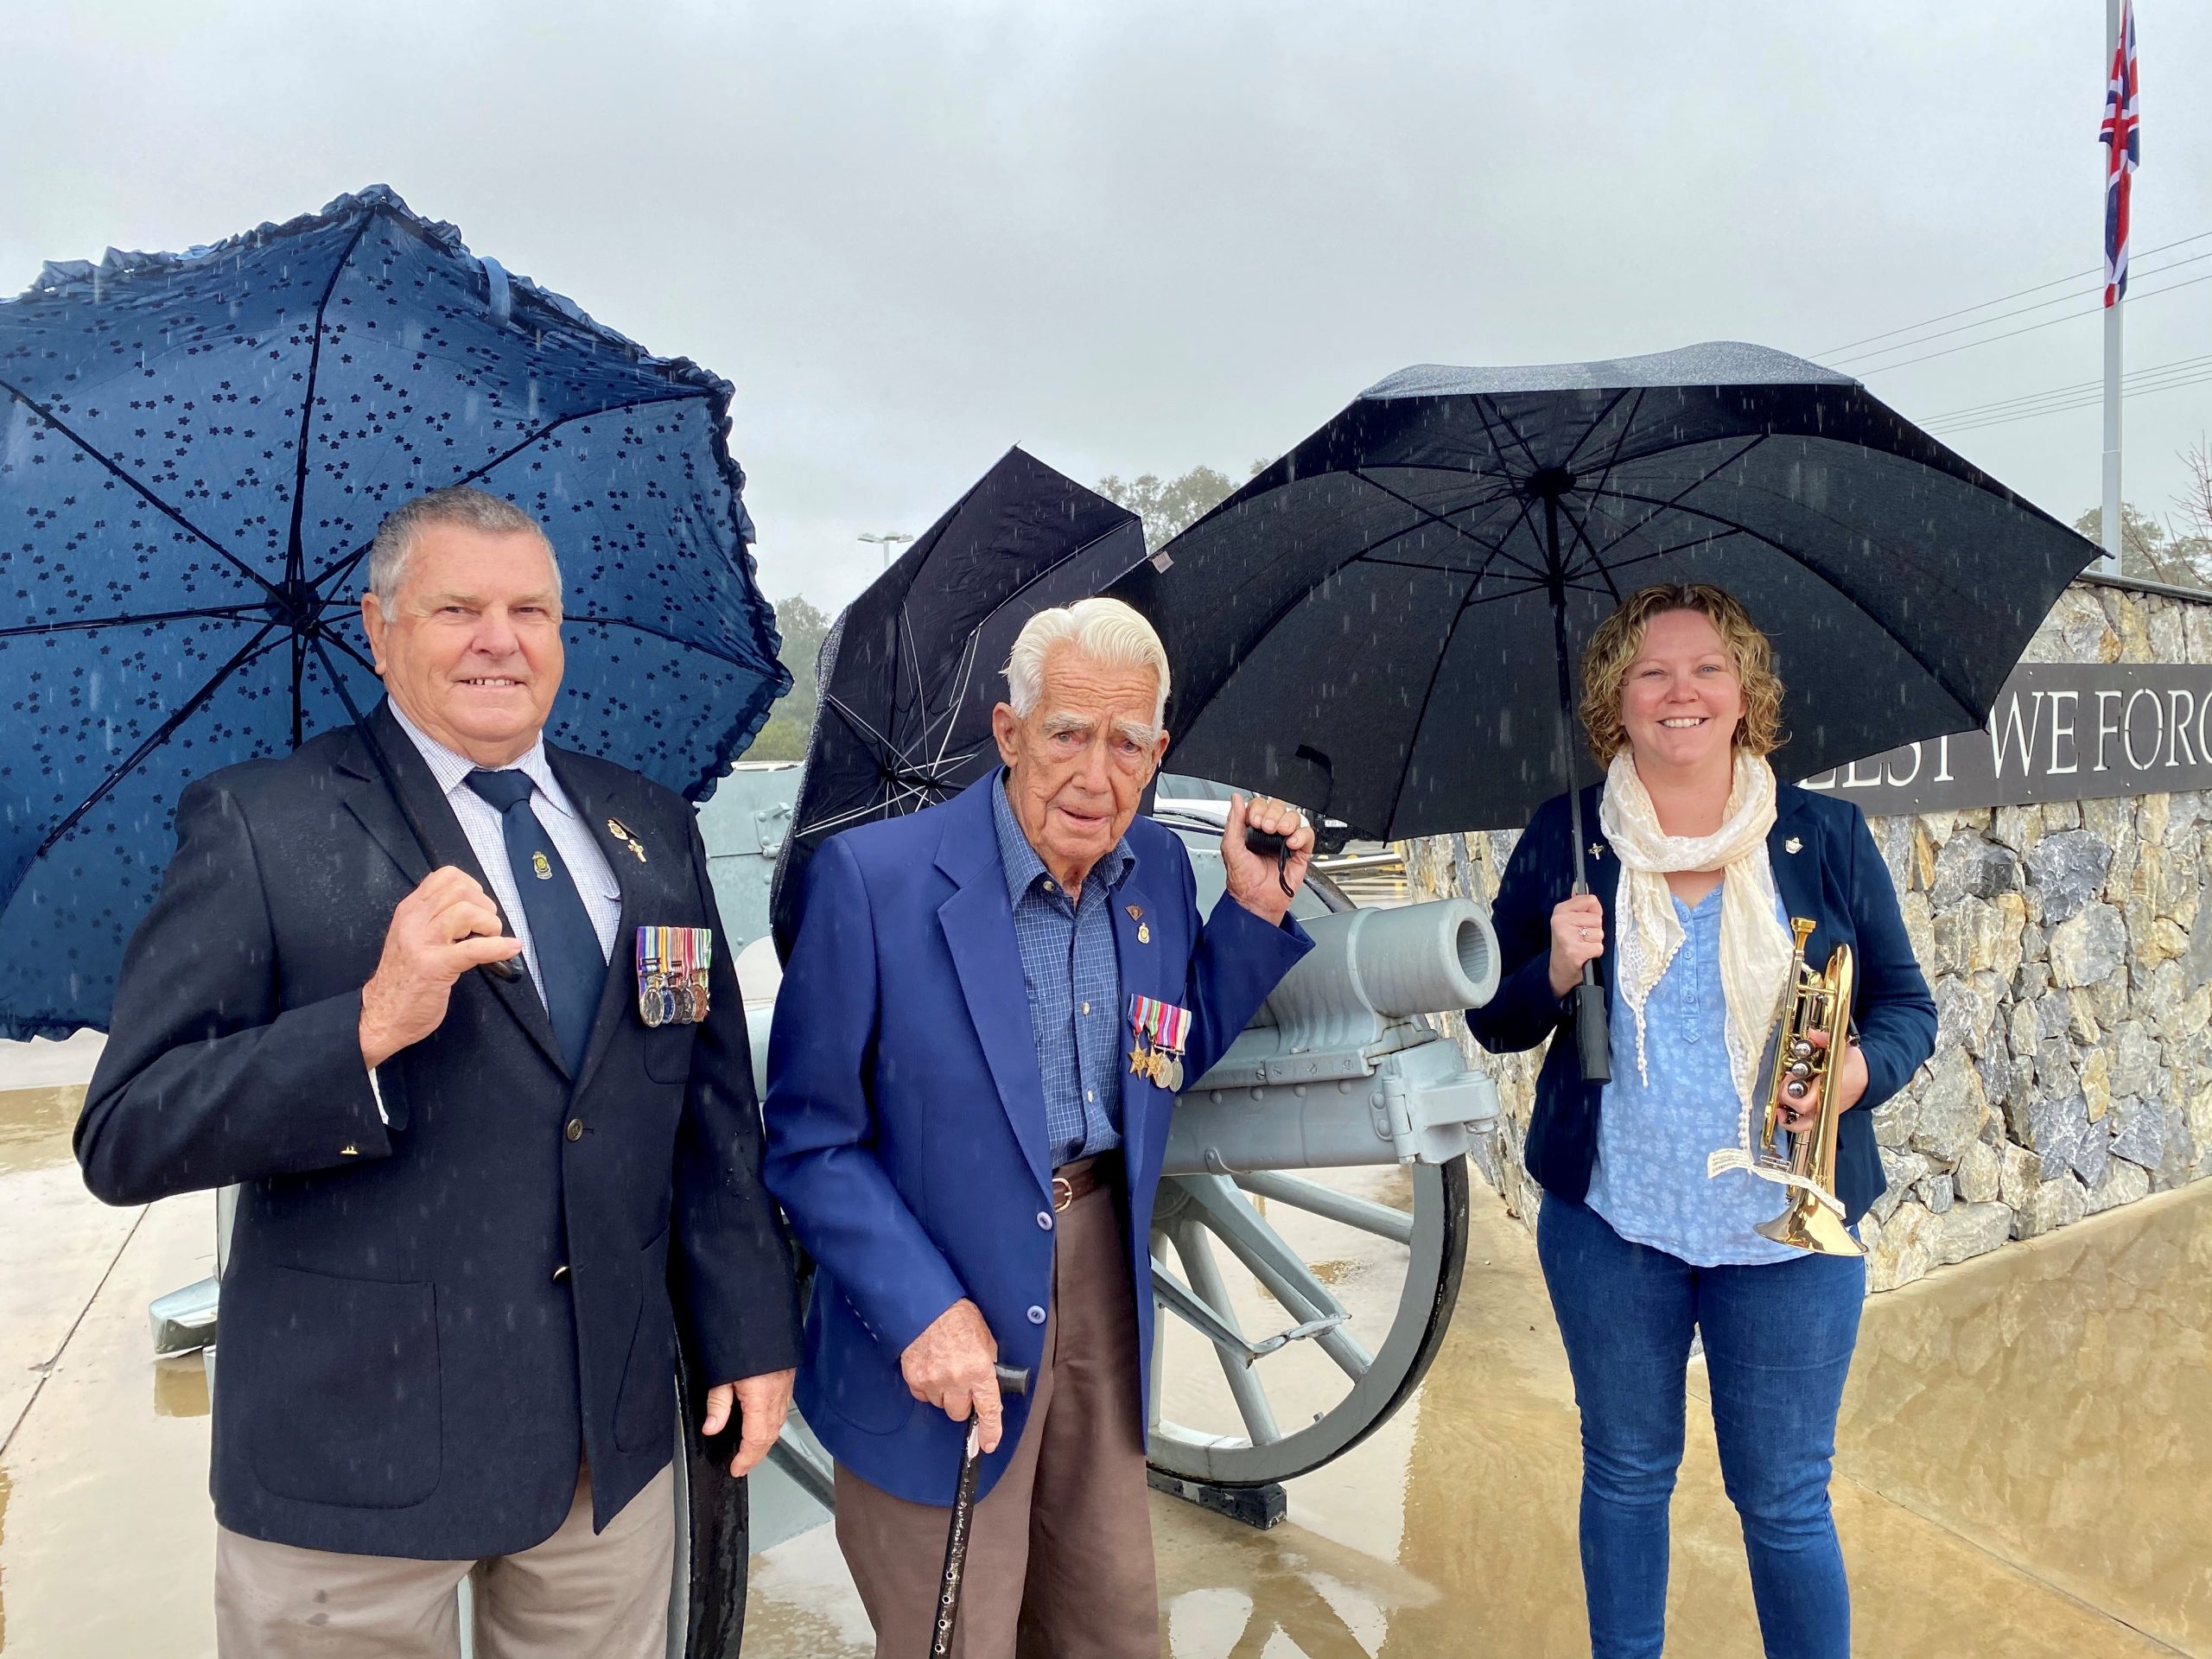 Rain, hail or shine: Vietnam Veteran Dennis Lowder, World War II veteran John Collett and bugler Sarah Smith at the commemoration service held at the Narrabri RSL Club on Saturday to mark the 75th anniversary of VP (Victory in the Pacific) Day, the end of World War II.